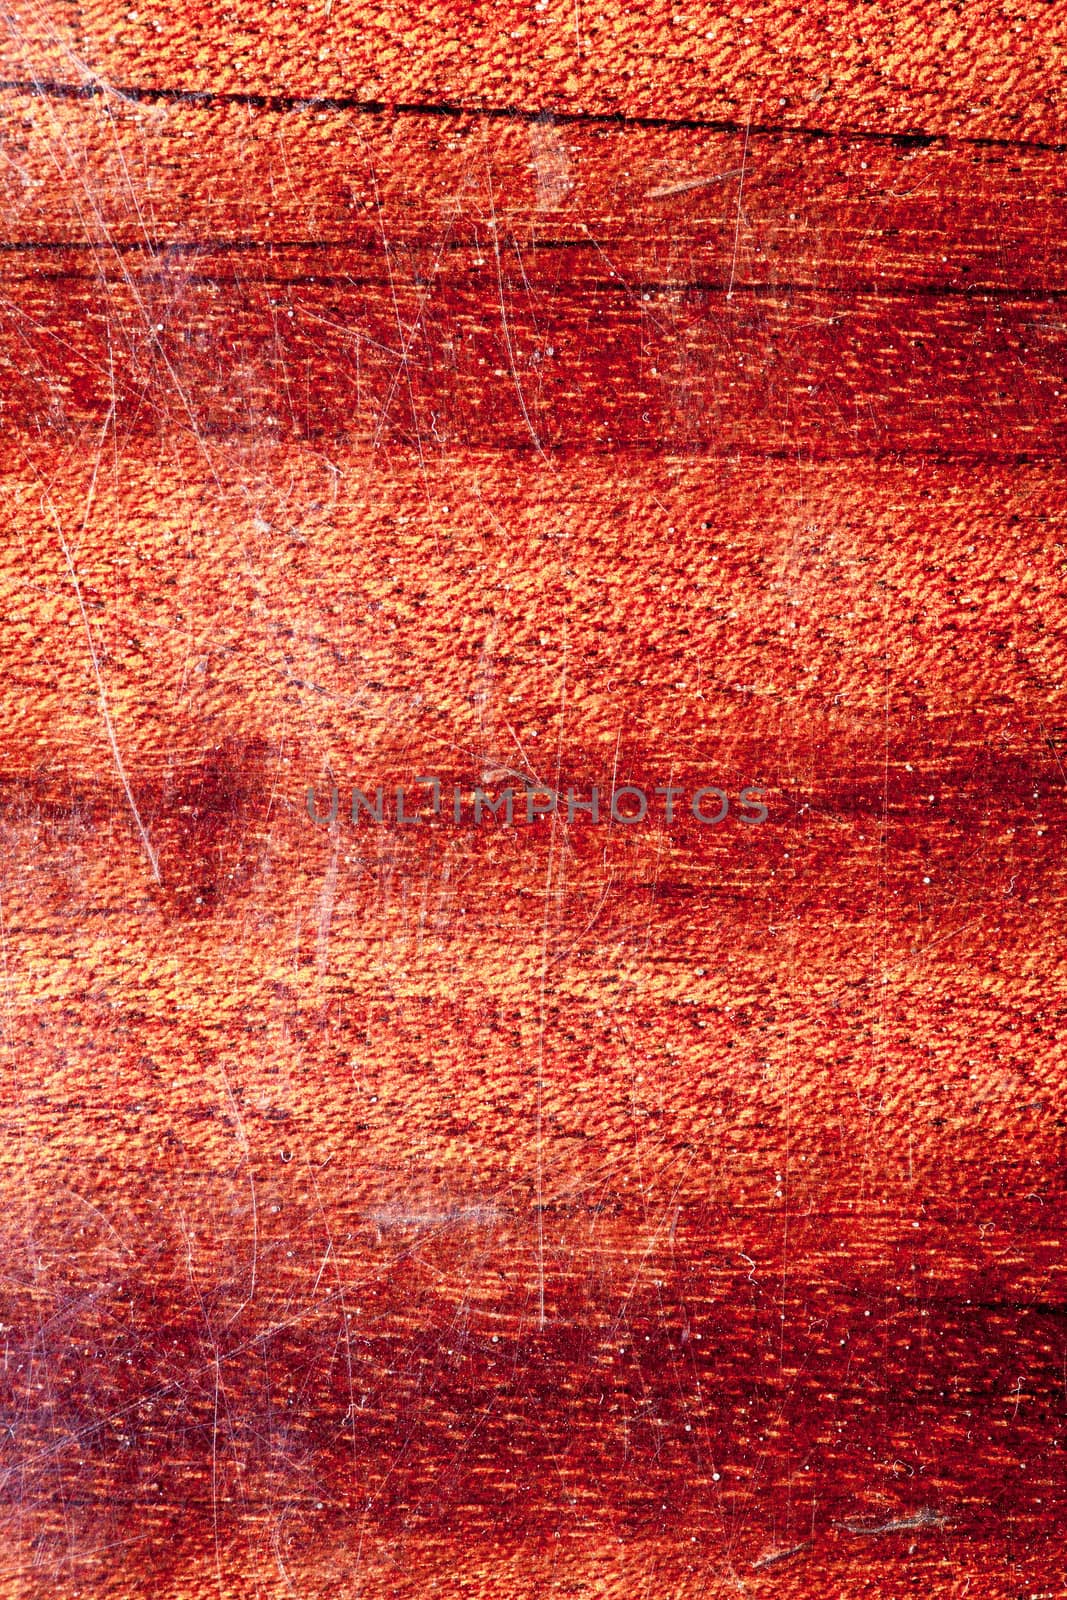 grunge old wooden texture used as background.